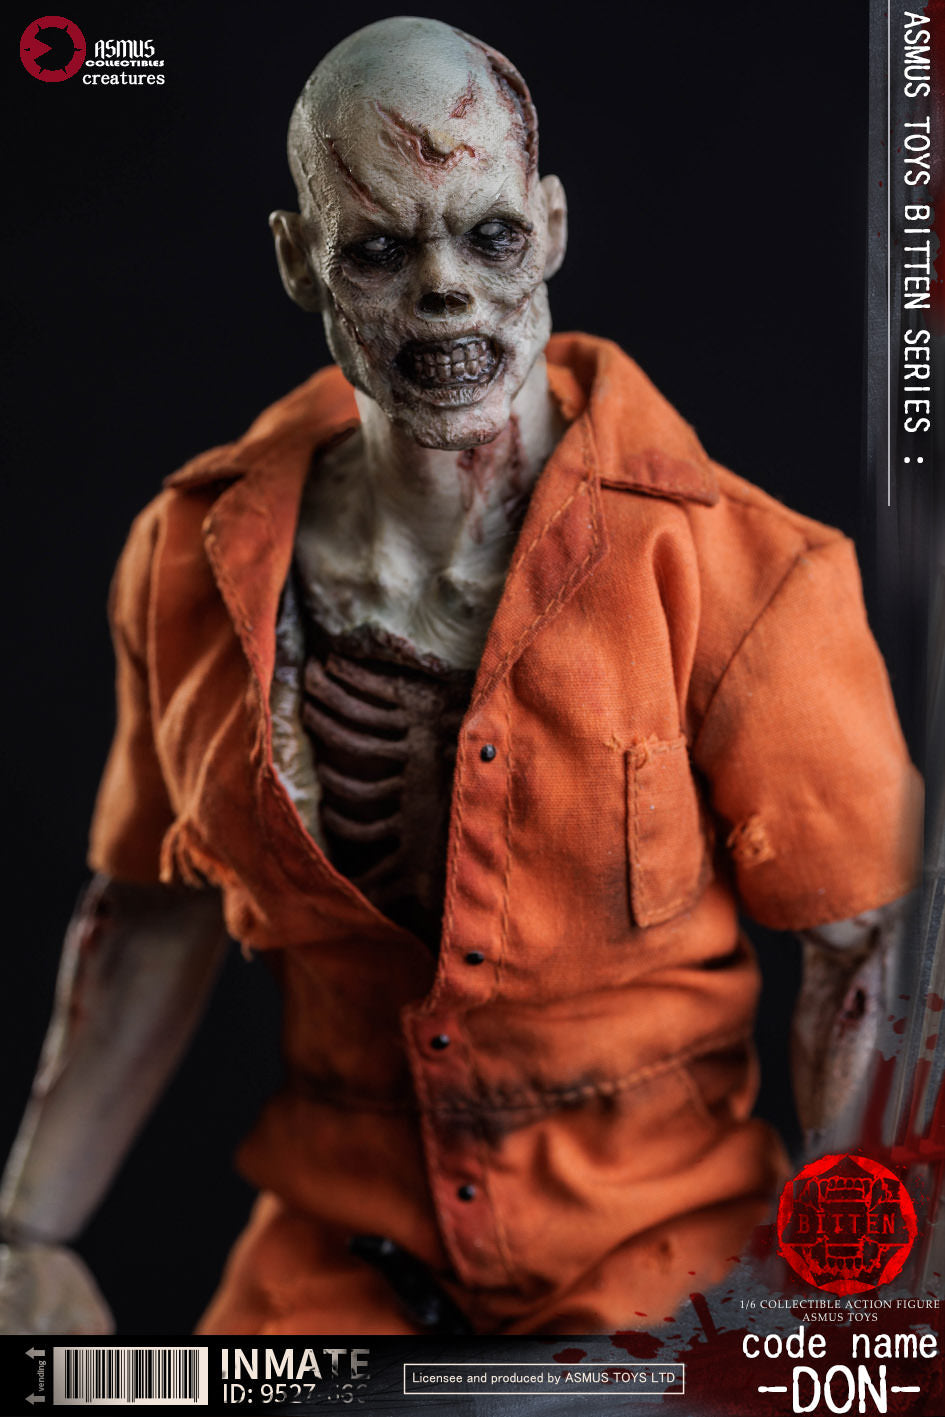 Bitten: Don Sixth Scale Figure by Asmus